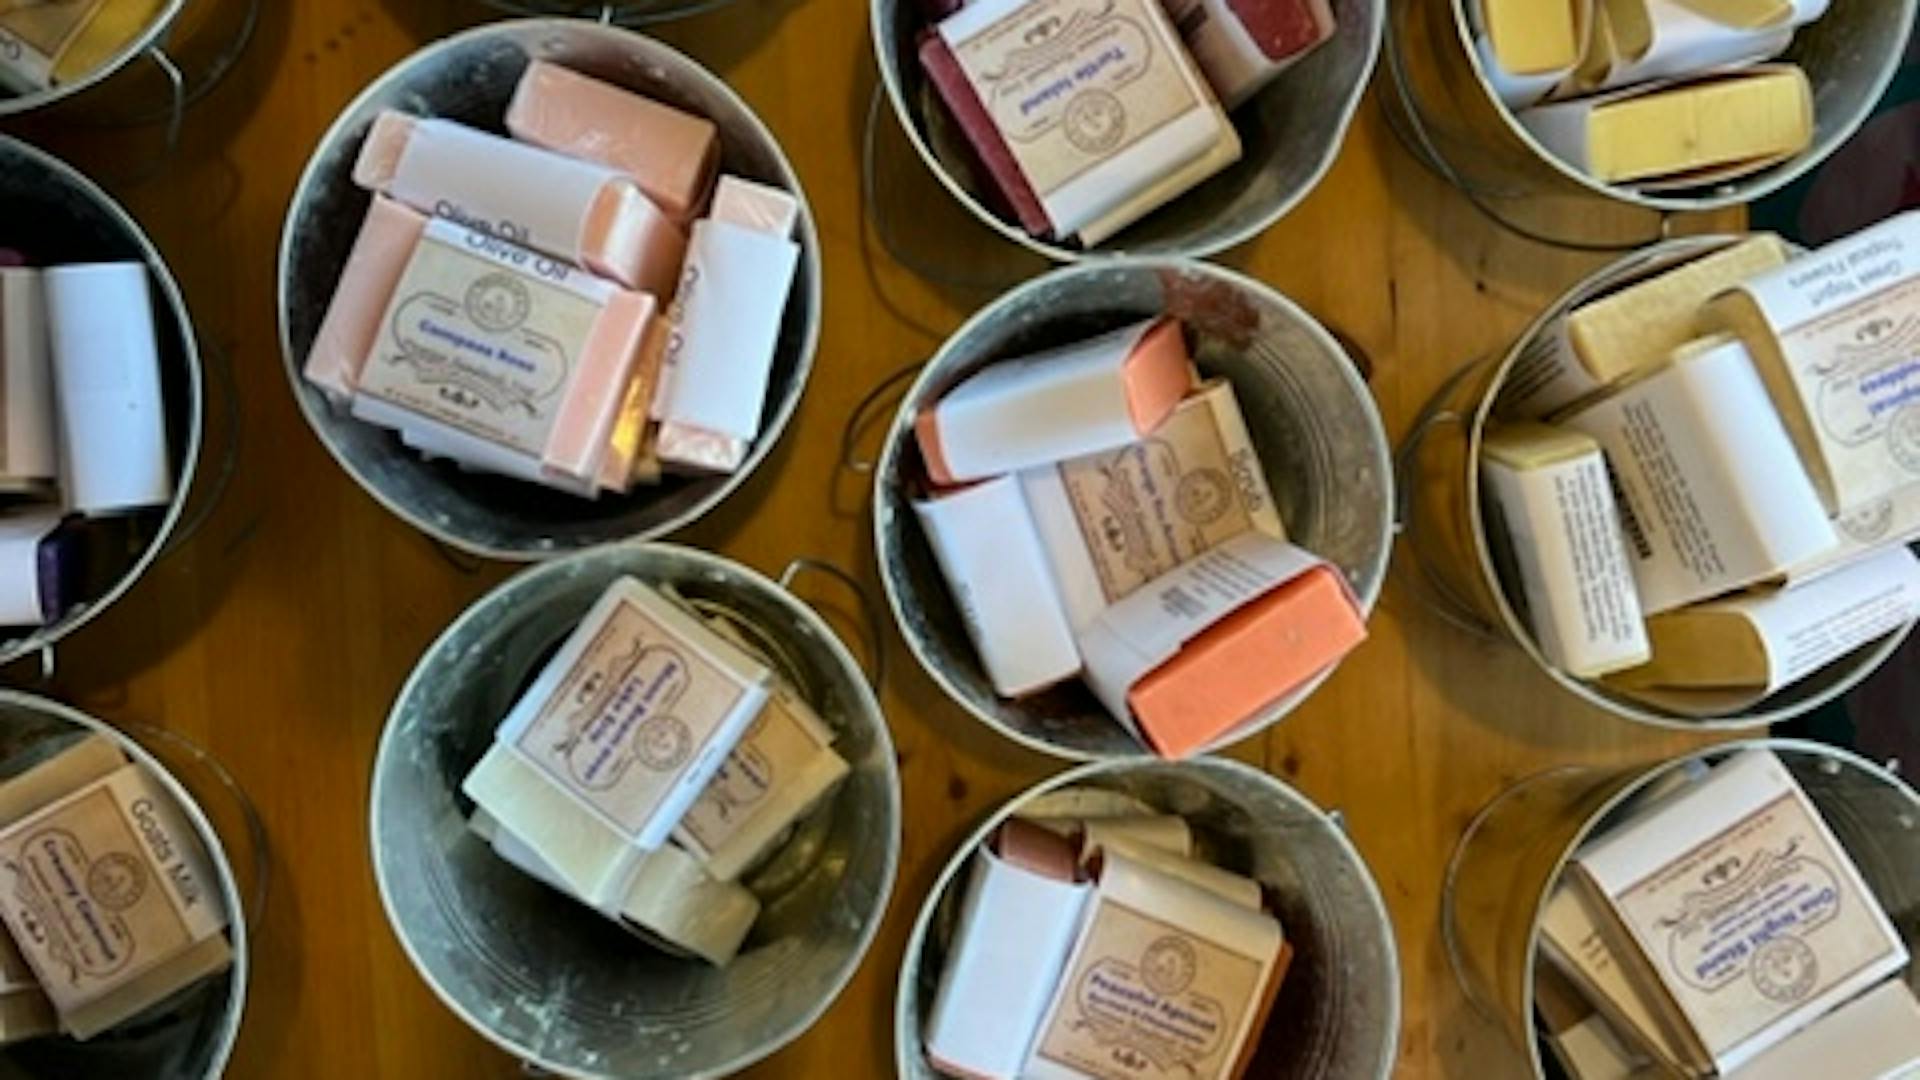 a collection of soap